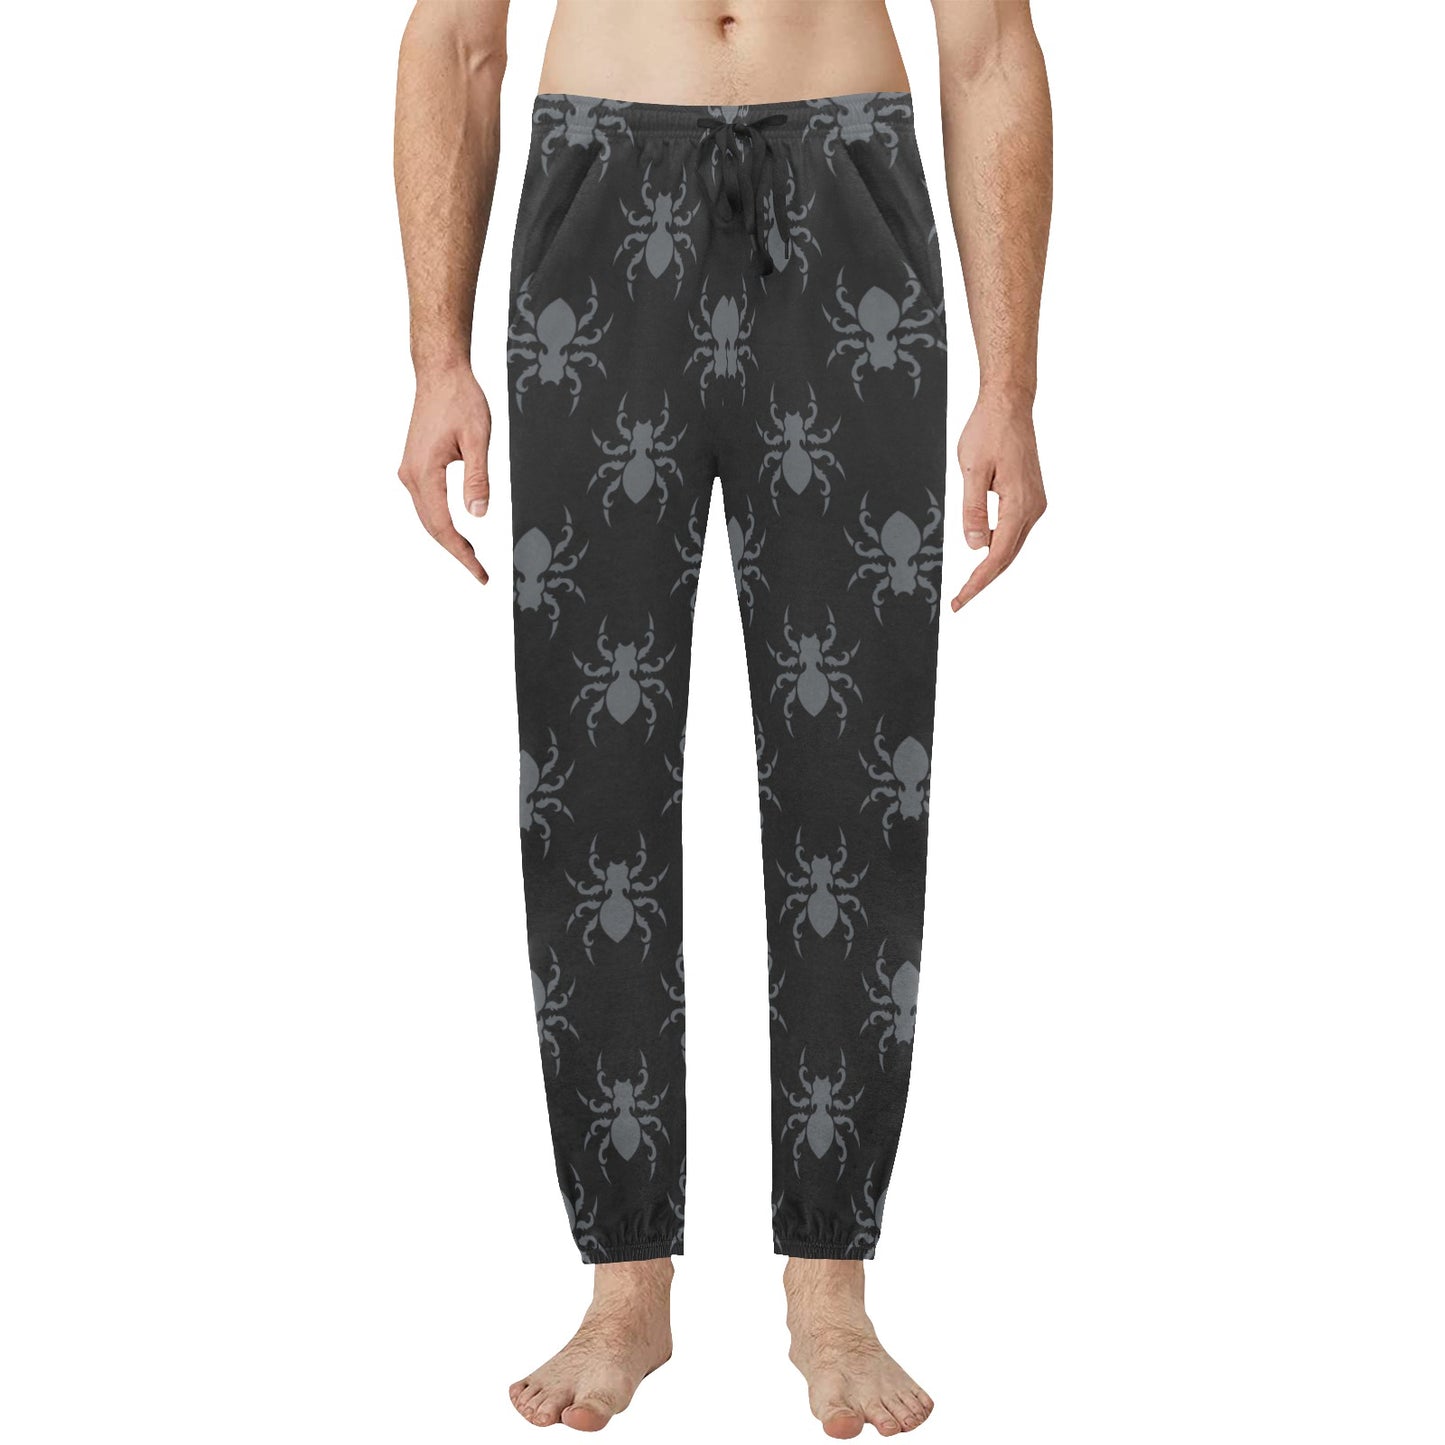 Gothic Spiders Joggers